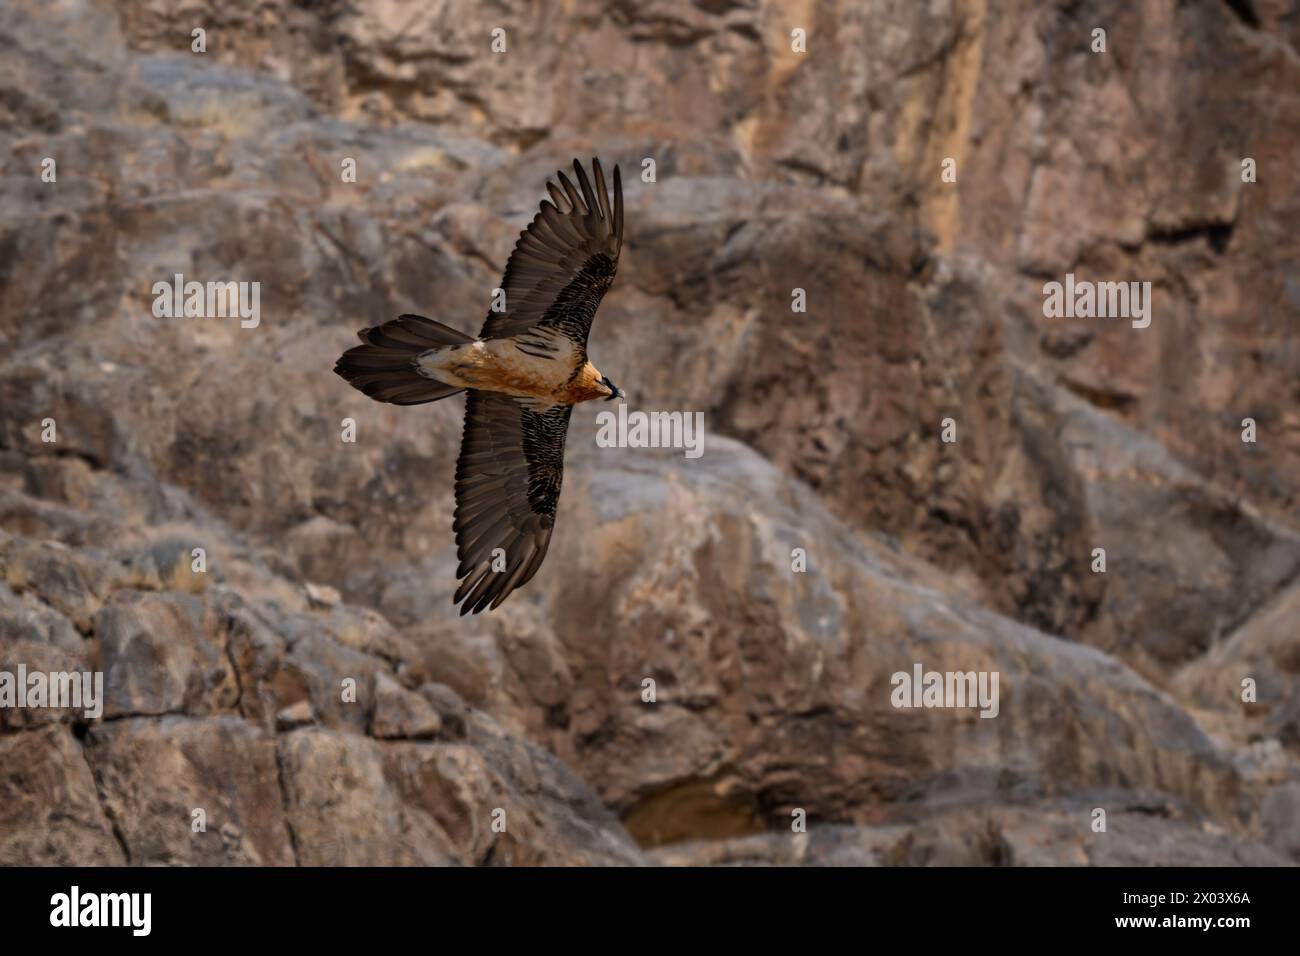 Bearded Vulture - Gypaetus barbatus, portrait of very large bird of prey from Euroepan and Asian mountains, Himalayas, Spiti valley, India. Stock Photo